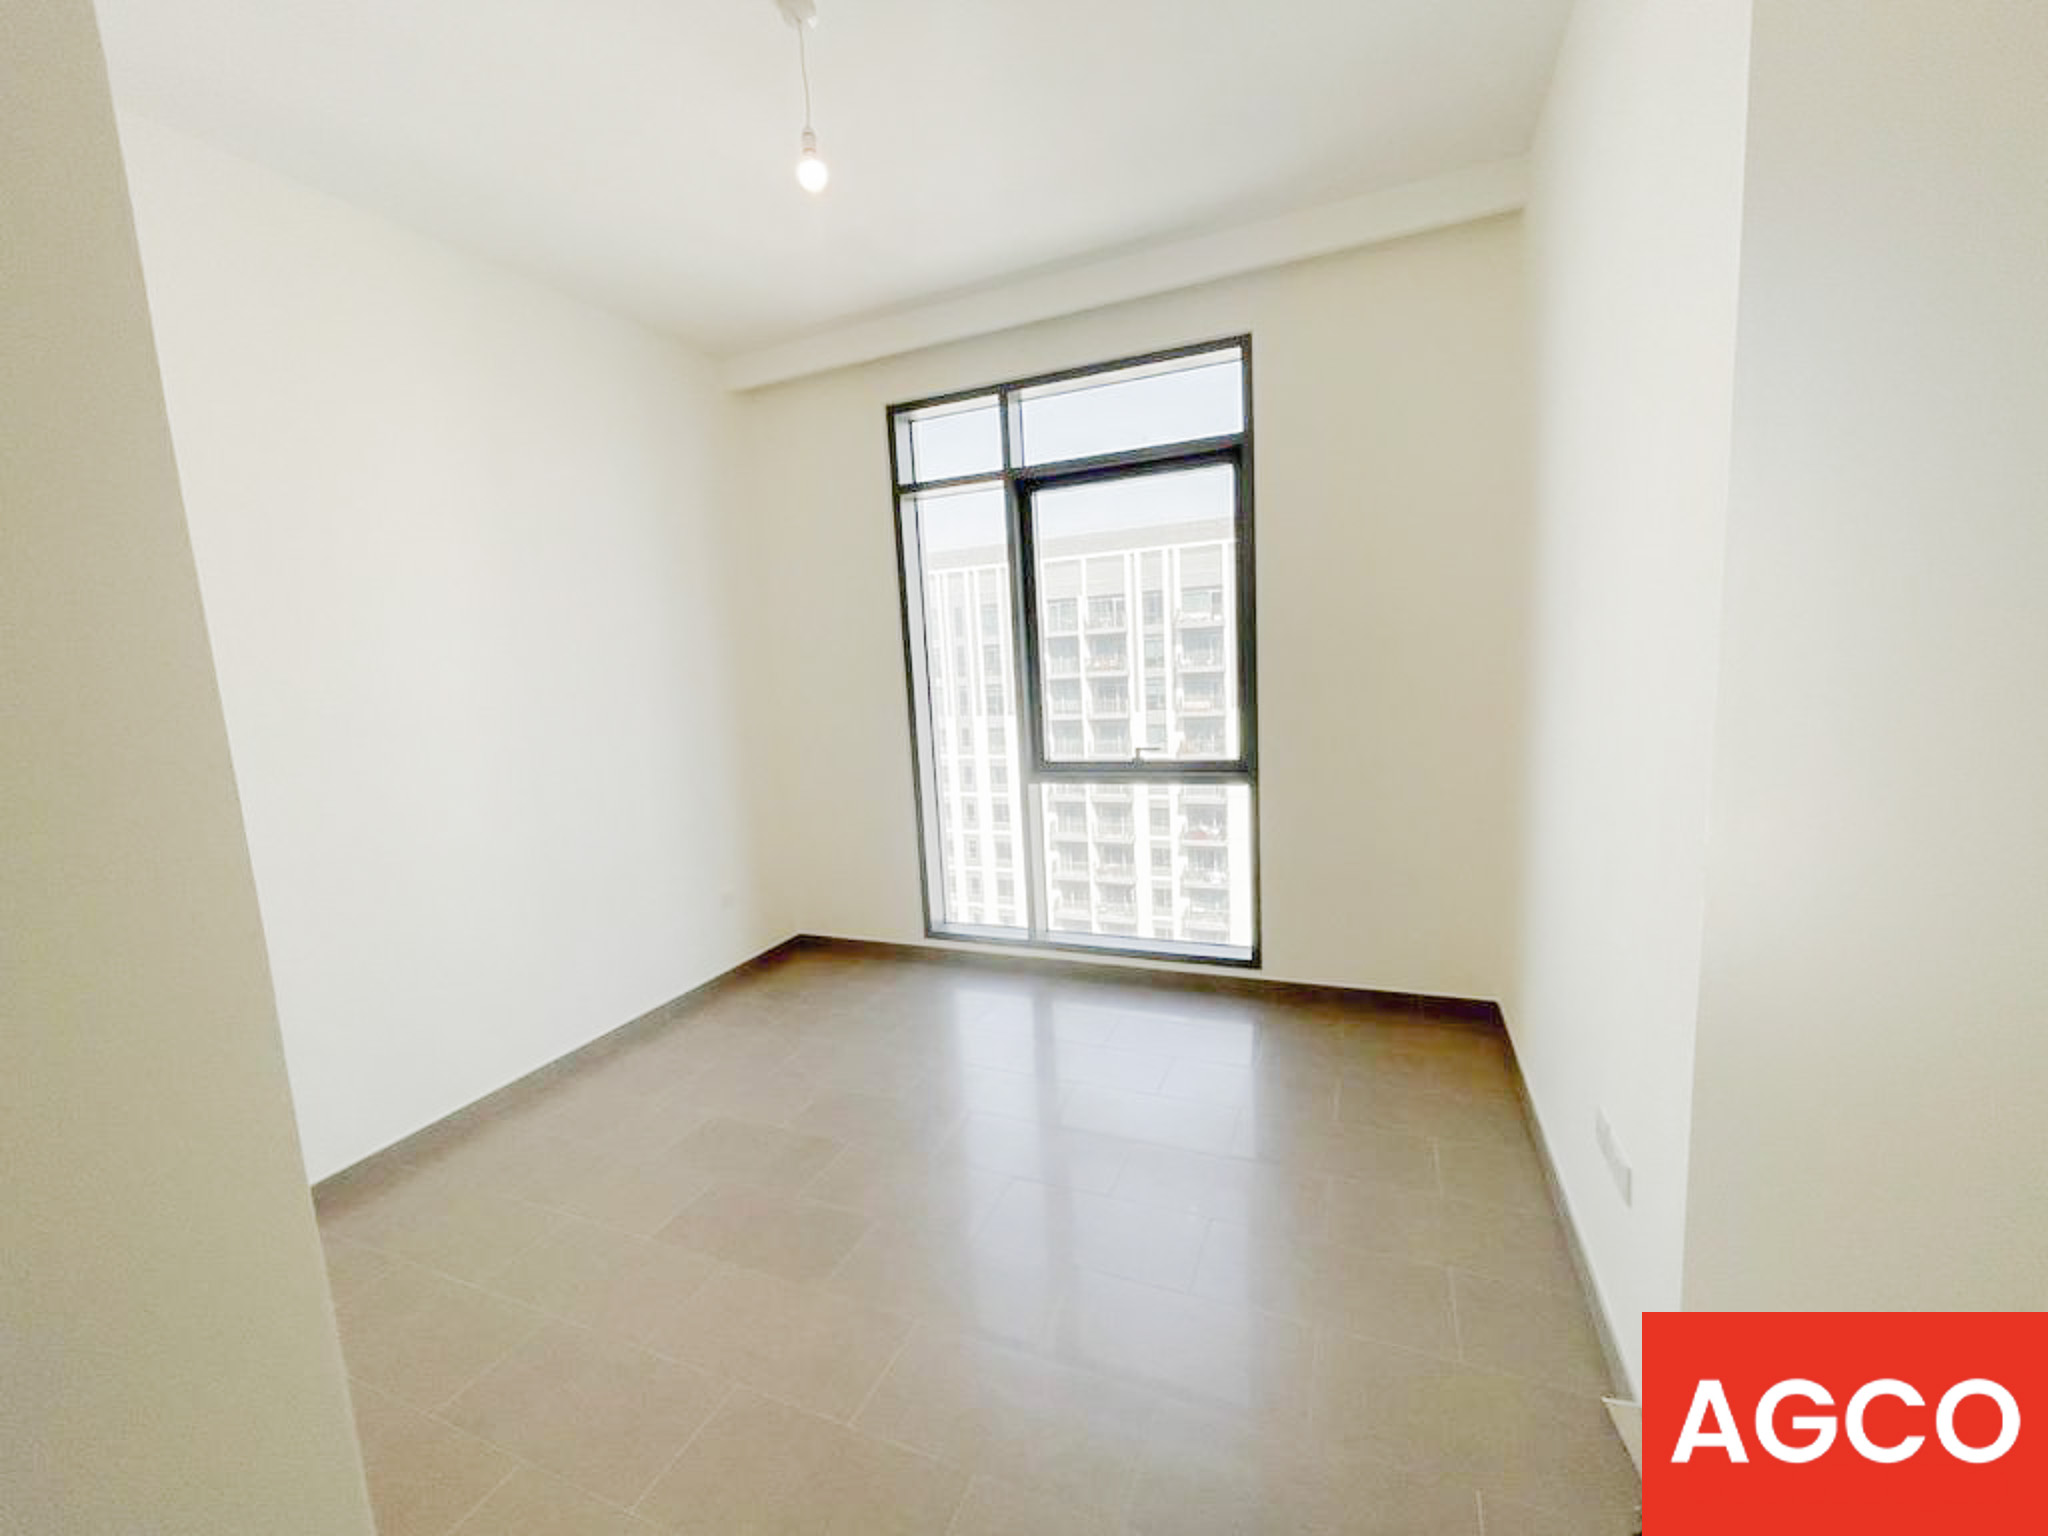 High-floor unfurnished unit ready to move in by March